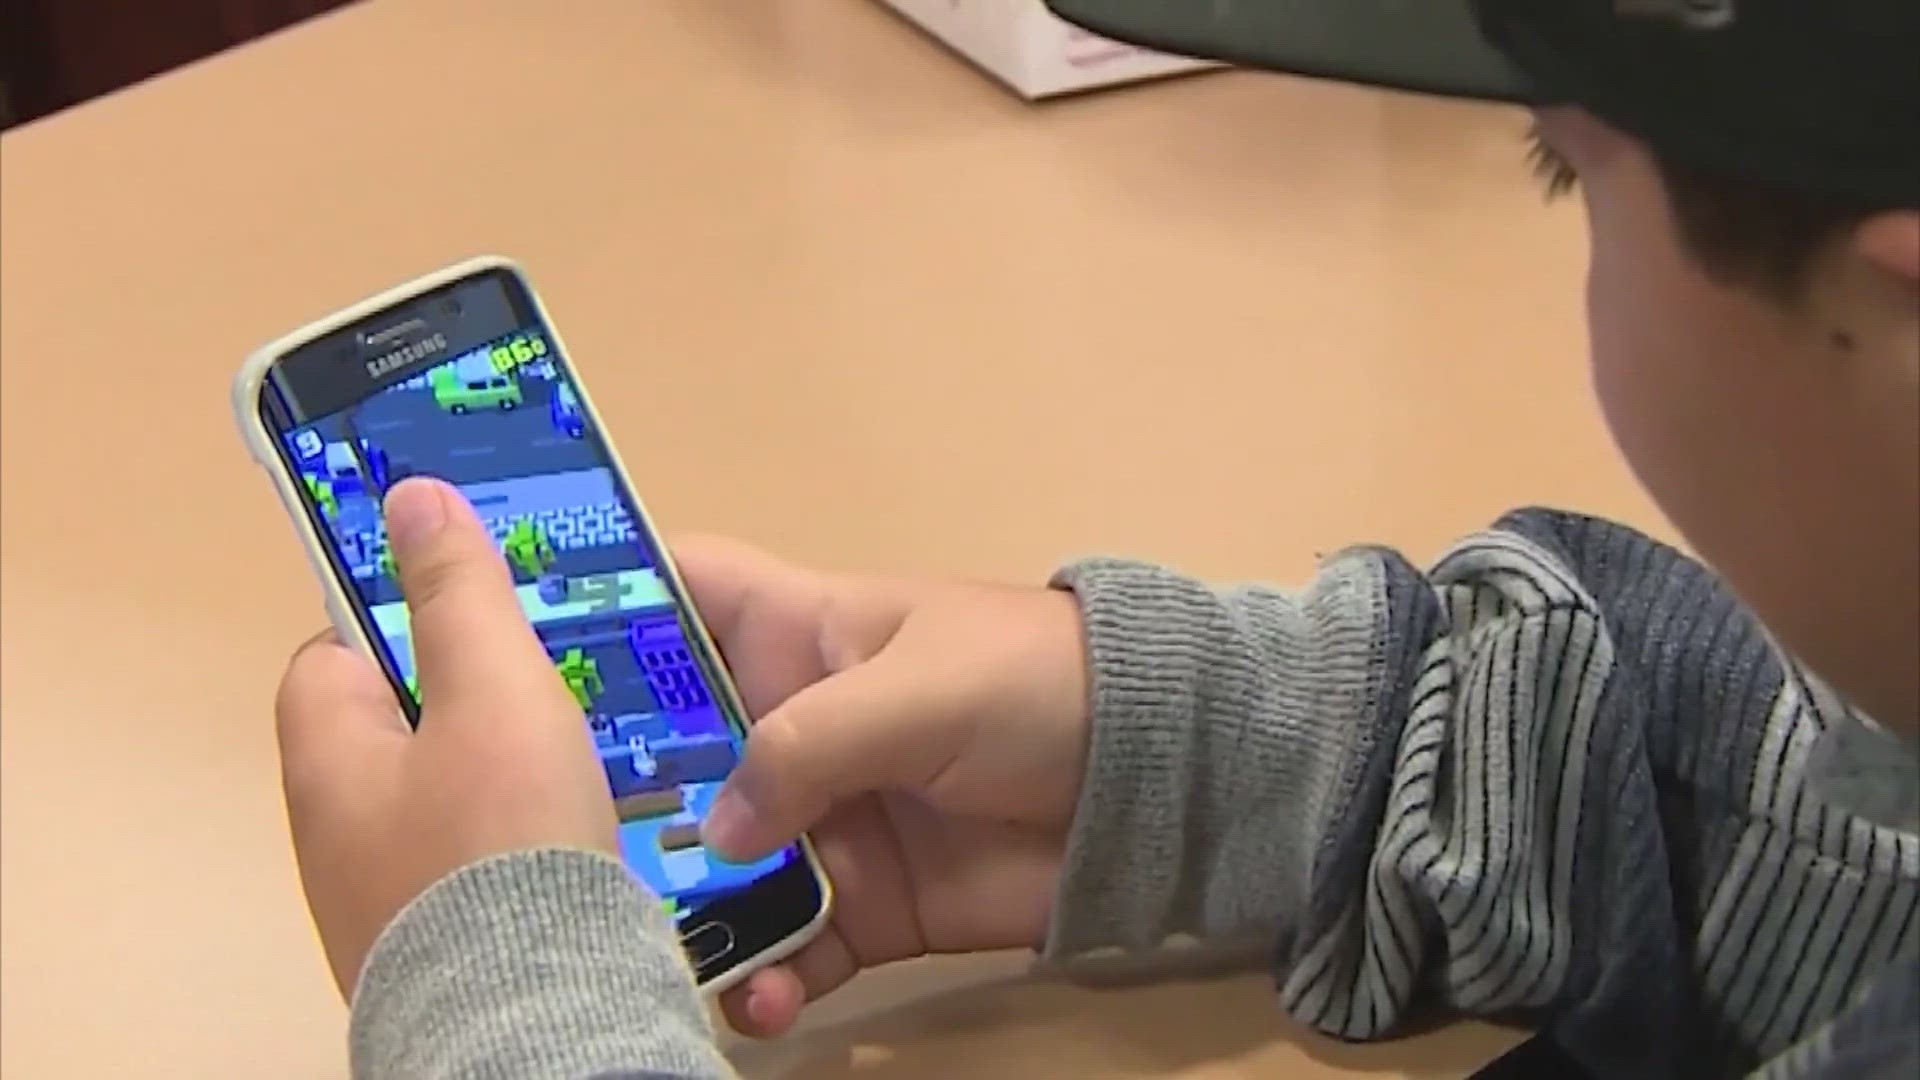 The Scottsdale Unified School District has banned K-8 students from using cell phones during the school day.